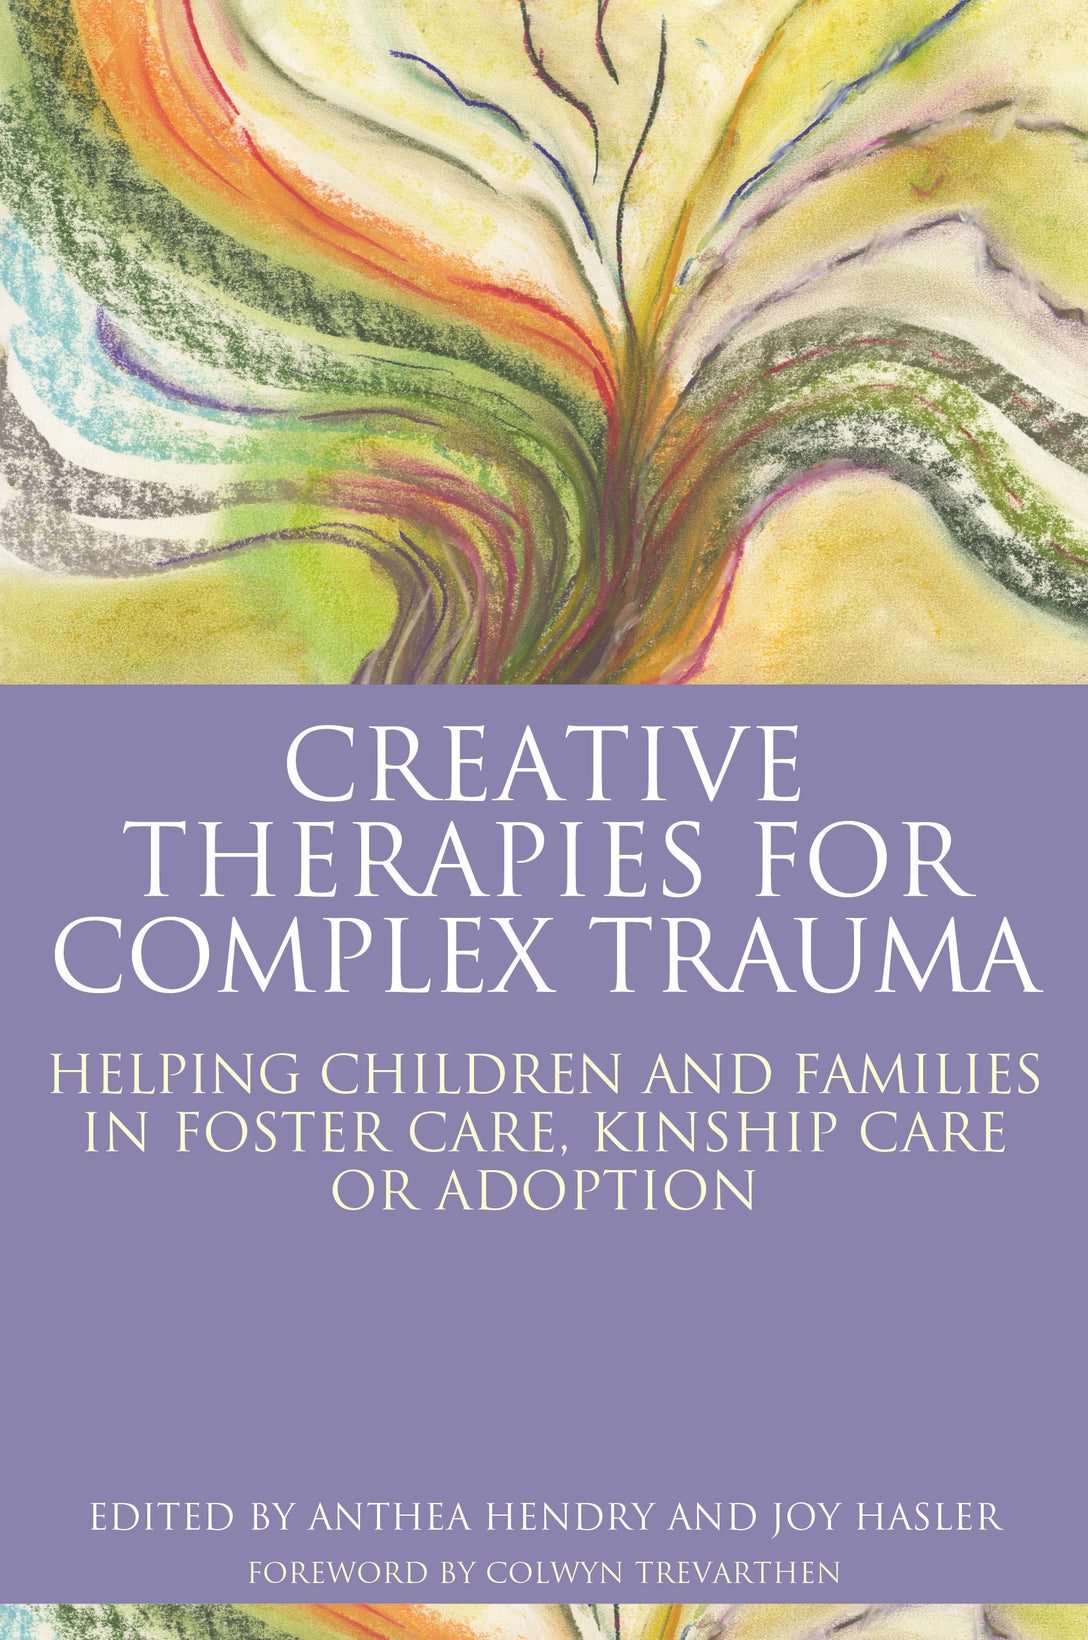 Creative Therapies for Complex Trauma by Joy Hasler, Anthea Hendry, No Author Listed